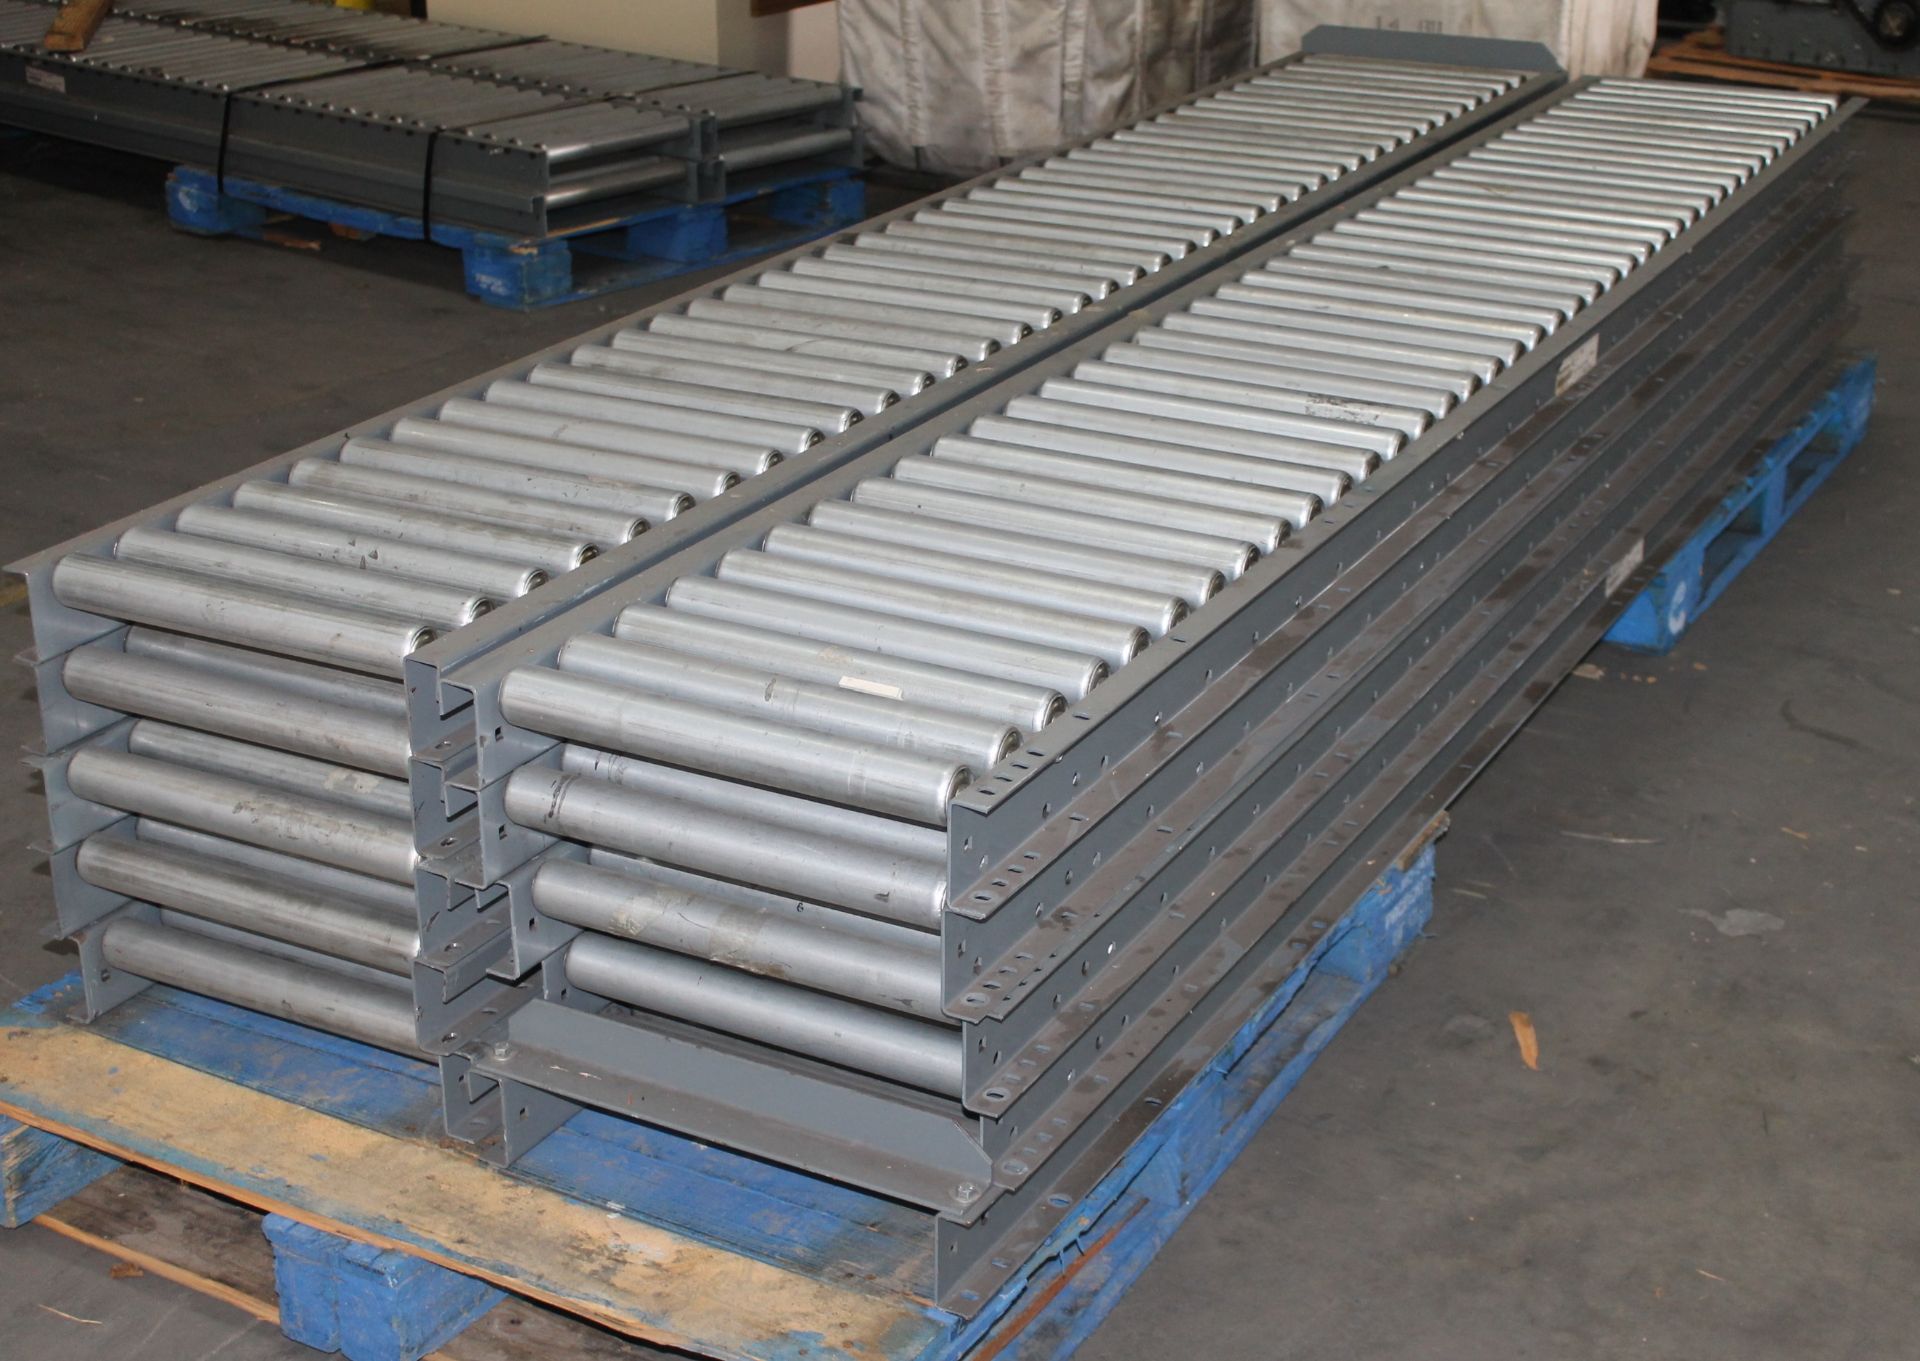 100 FT OF 18" GRAVITY ROLLER CONVEYOR, 1.9" ROLLER, 3" CENTER, PART NO: 915510MA - Image 4 of 4